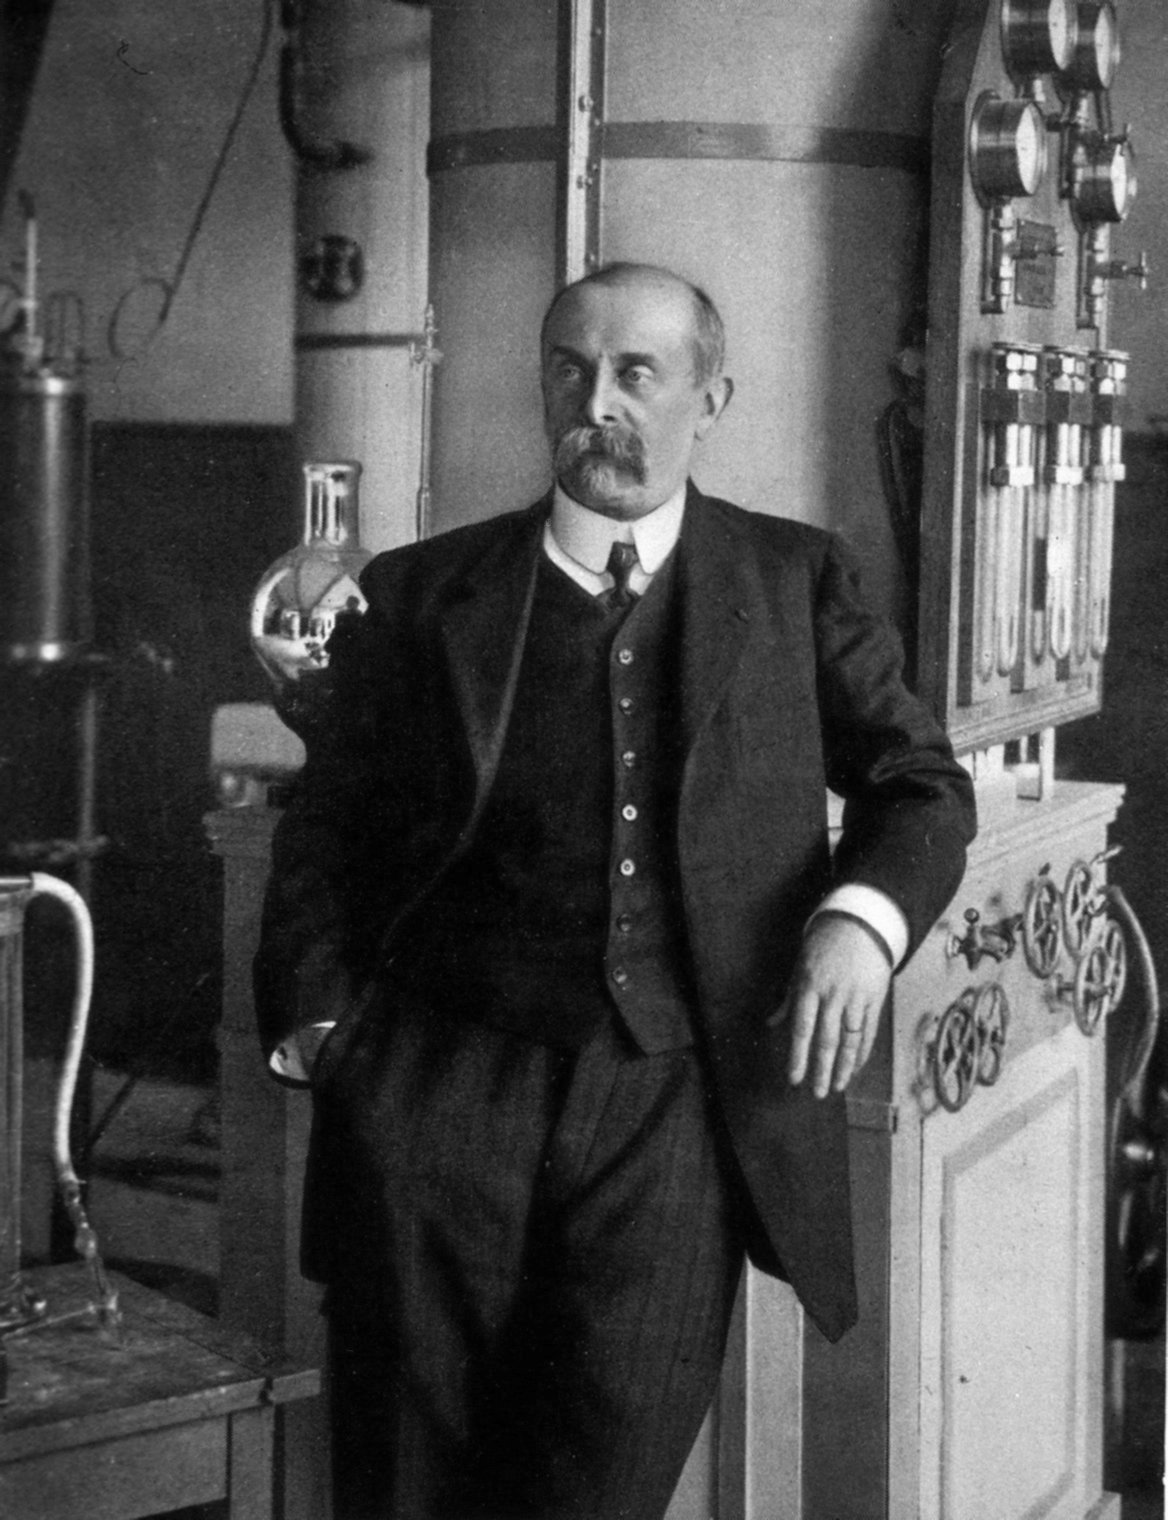 Jacques-Arsène d'Arsonval one of the inventors of the freeze-drying process